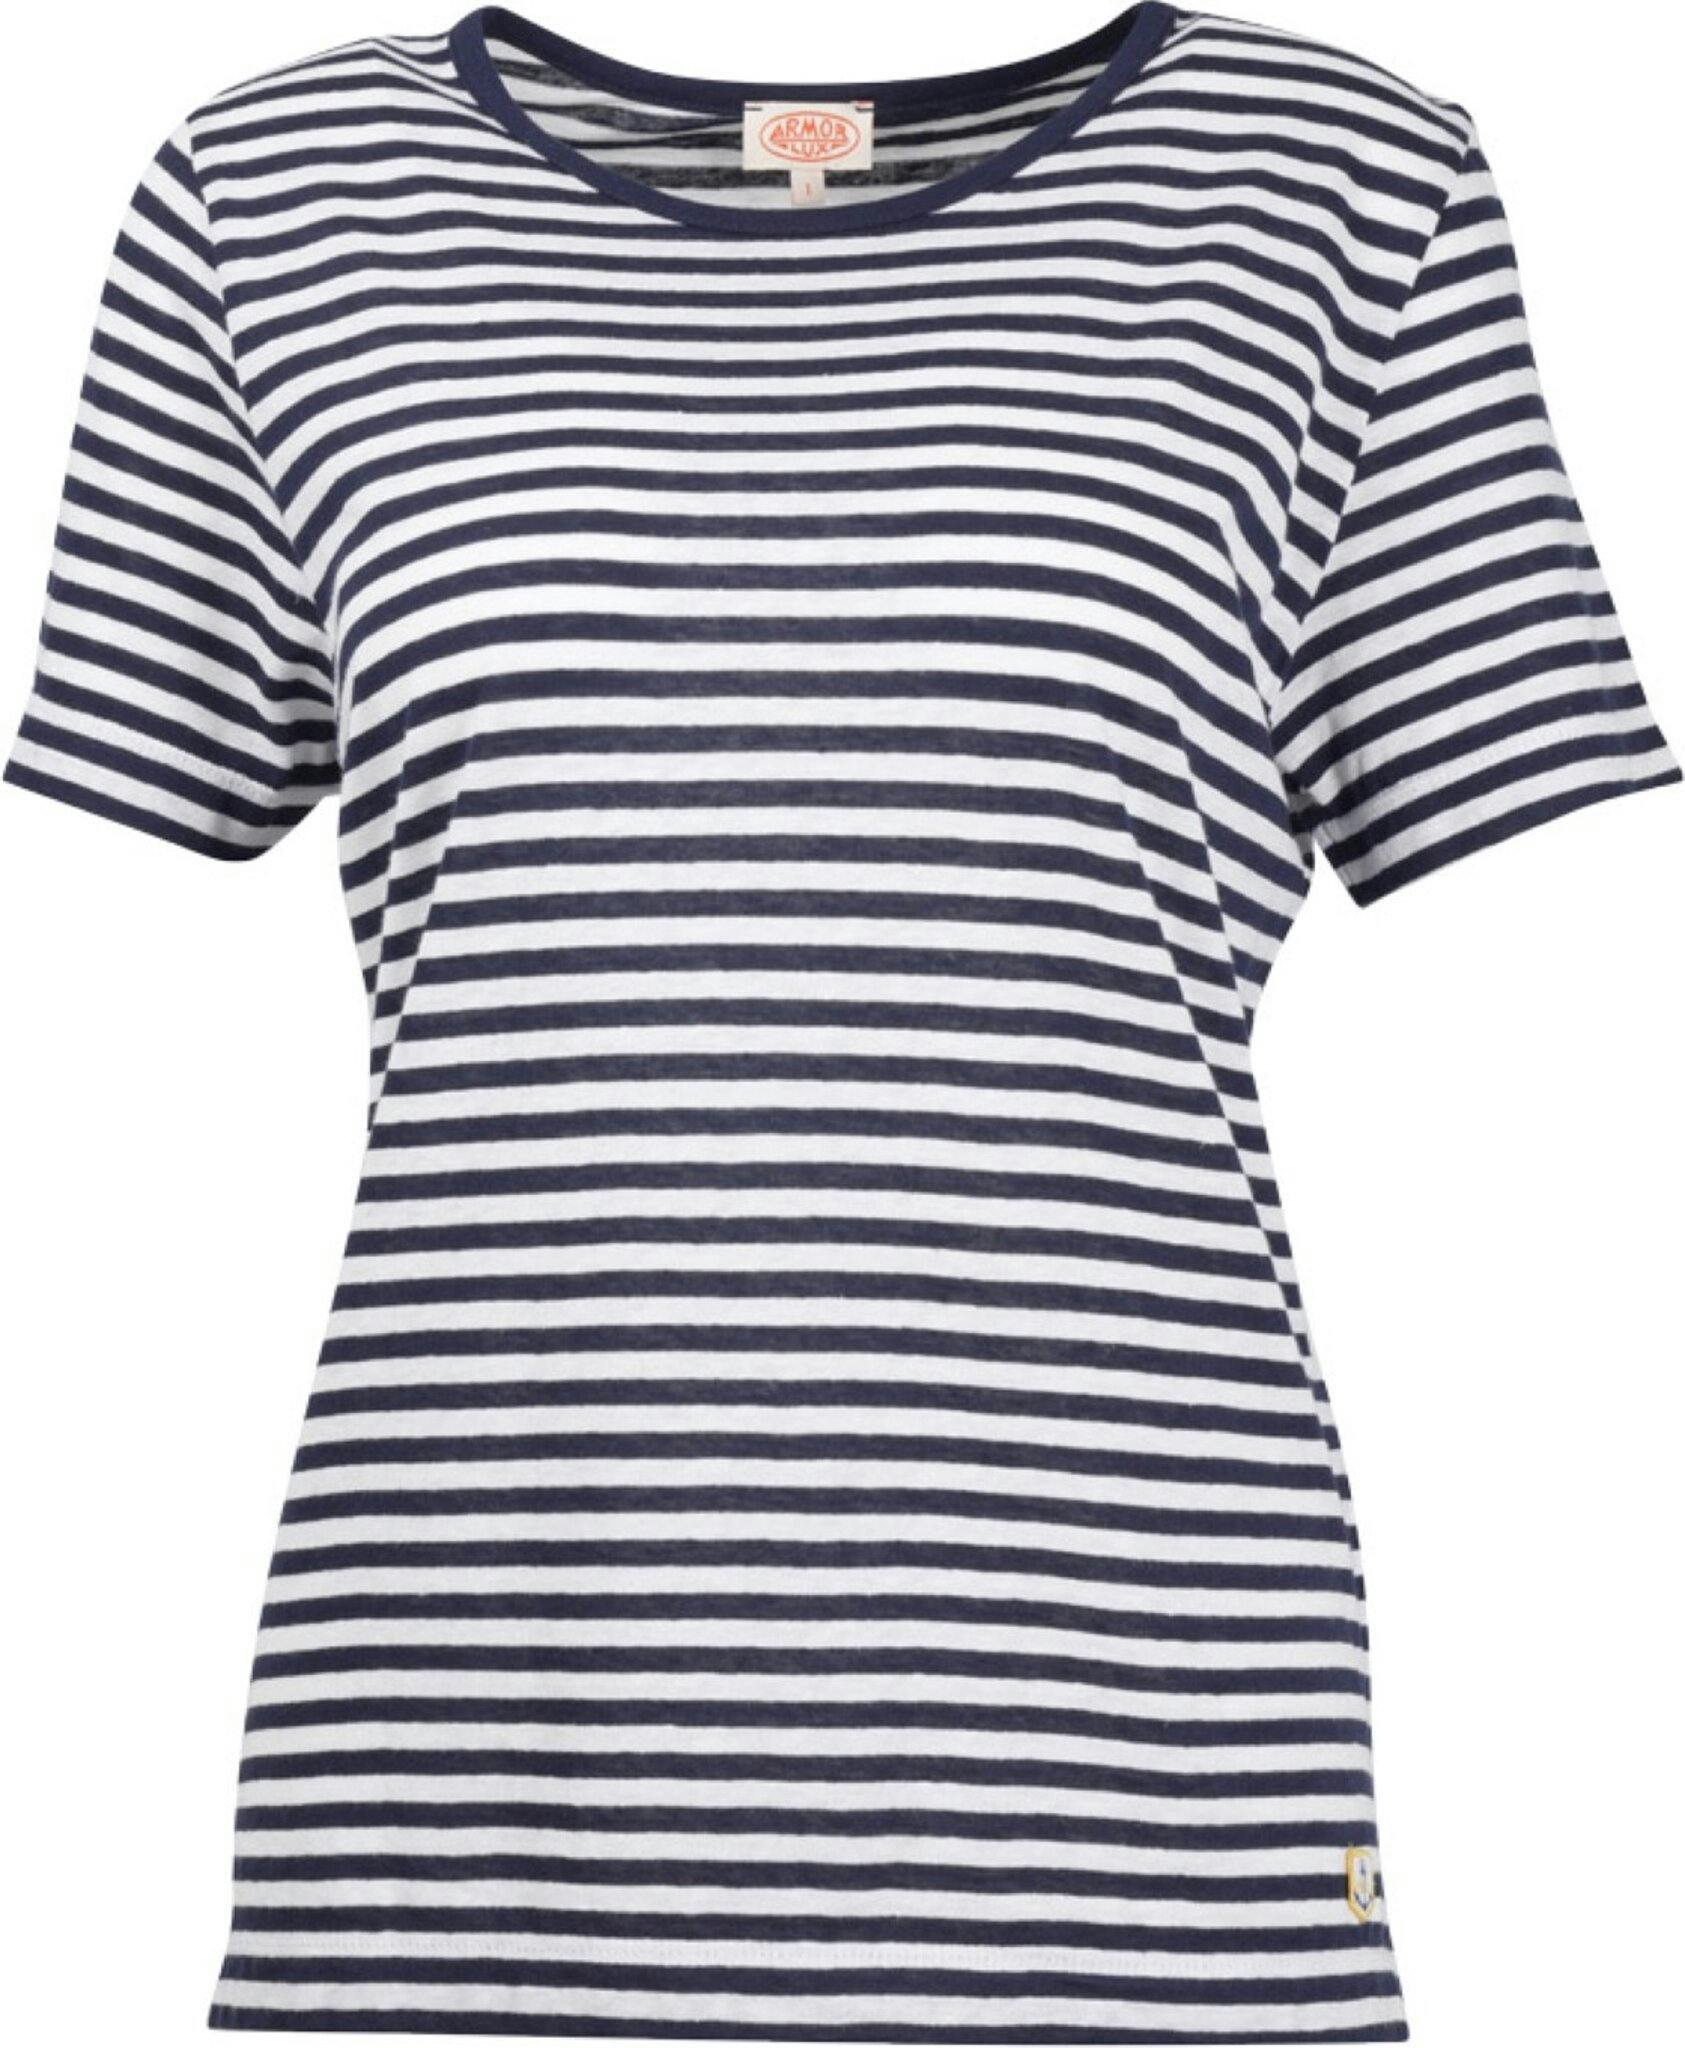 Product image for Cotton and Linen Striped Tee - Women's